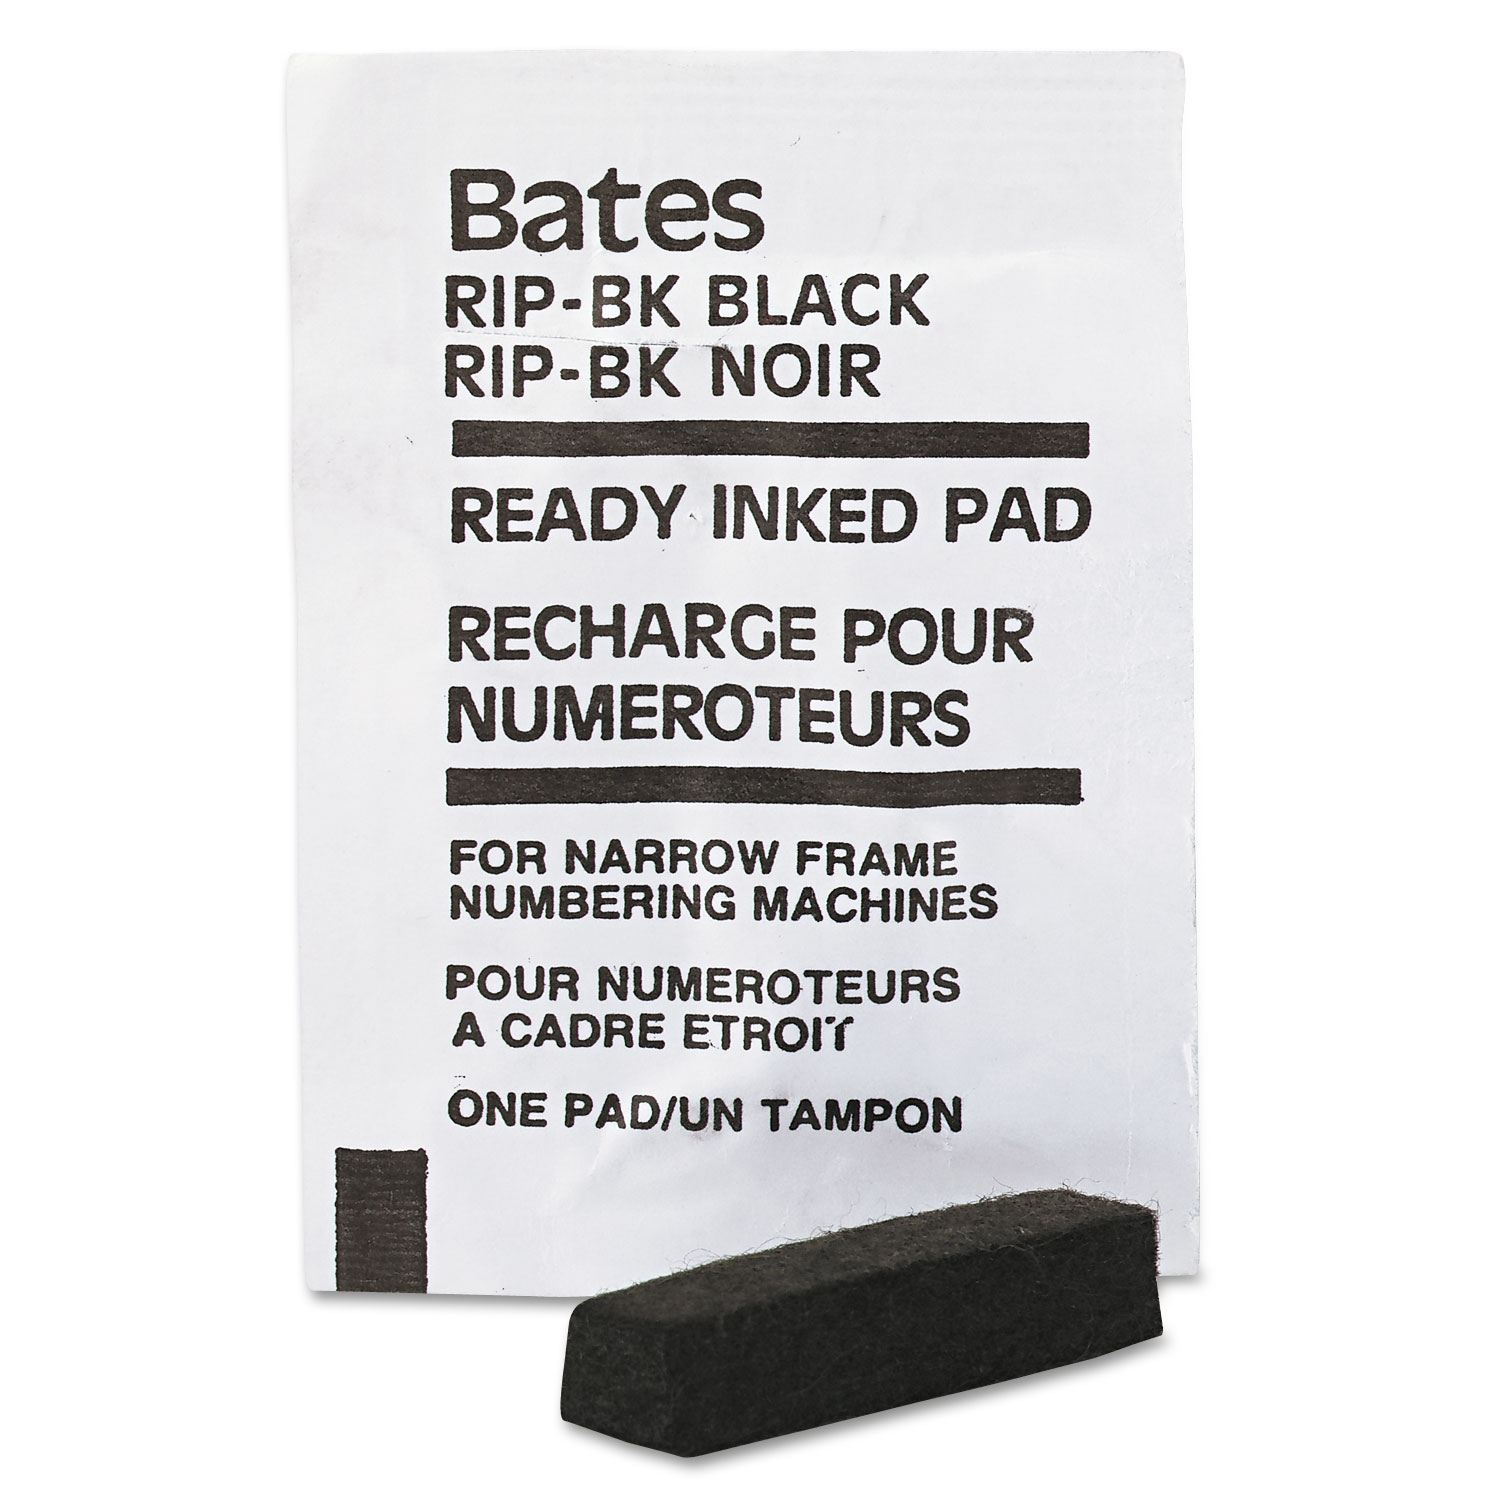  Bates 9808196 Ready-Inked Pad for Multiple/Lever Movement Numbering Machine, Black (AVT9808196) 